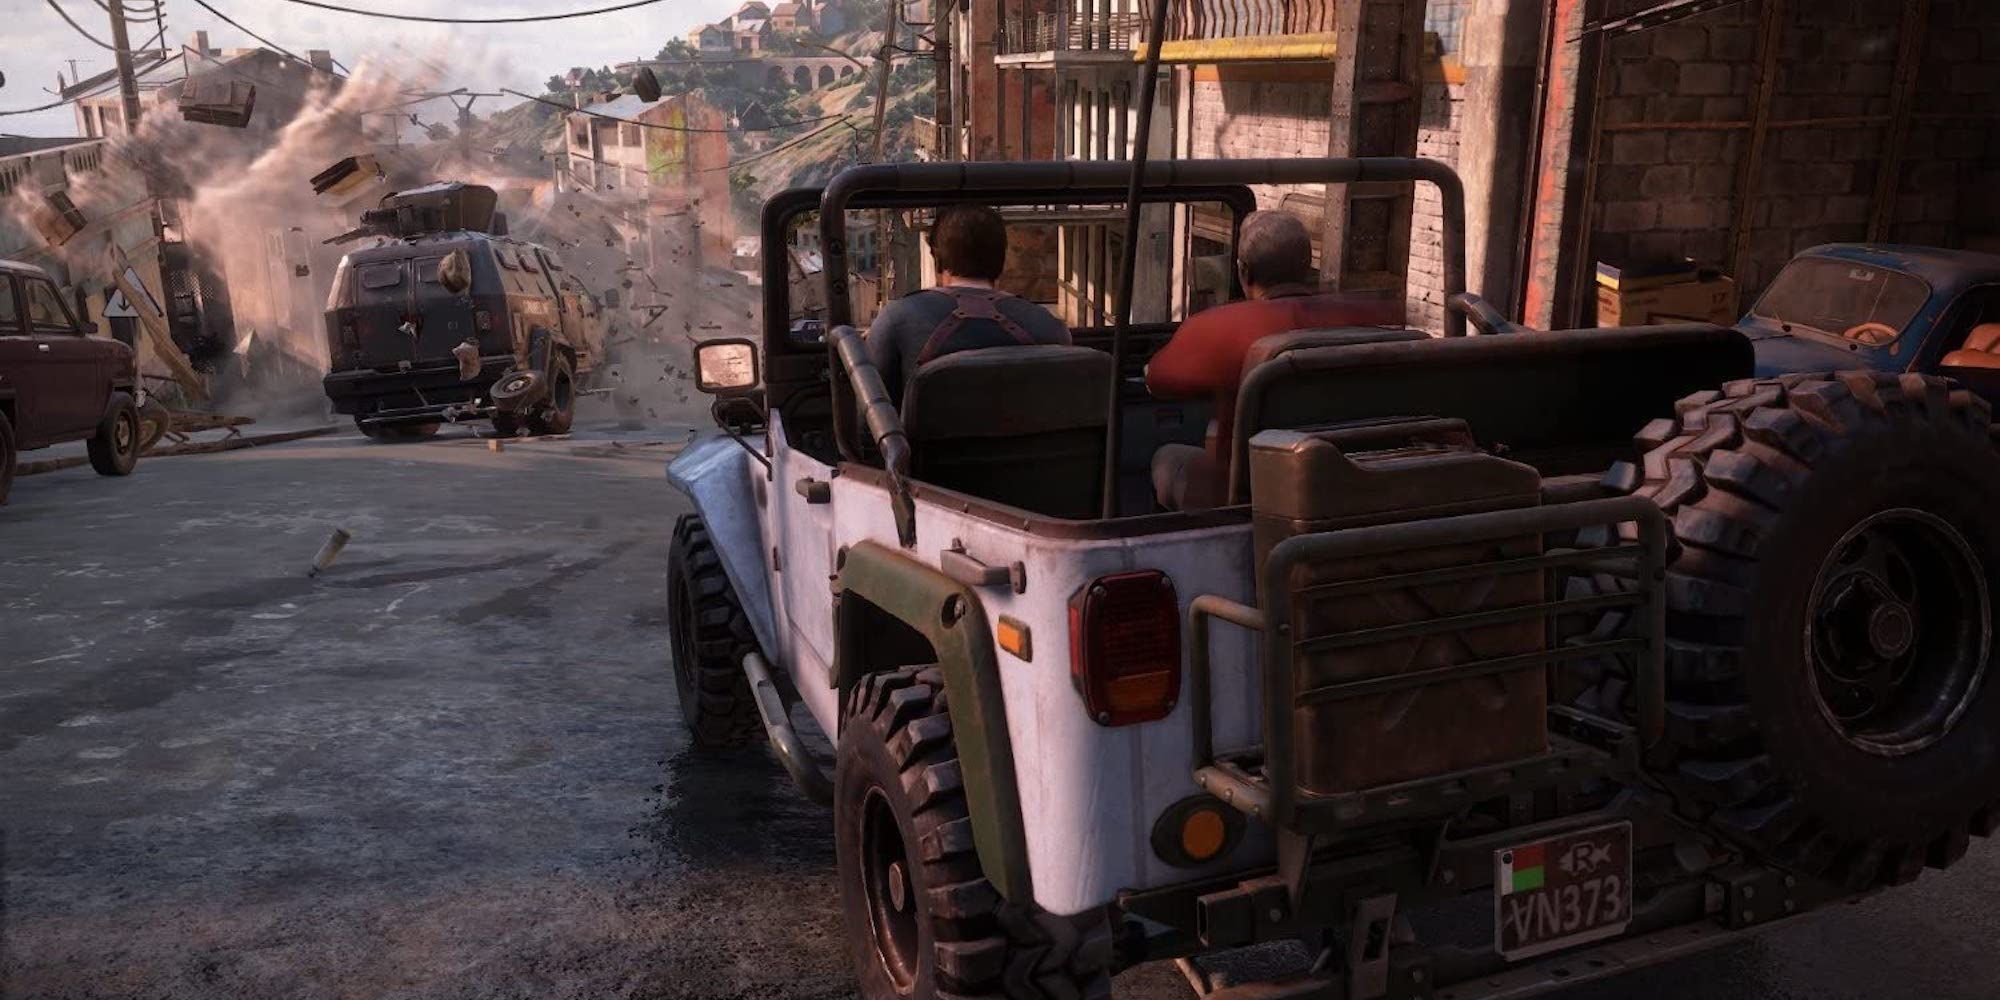 Uncharted: The Lost Legacy, Patch 1.4, Optimized Settings